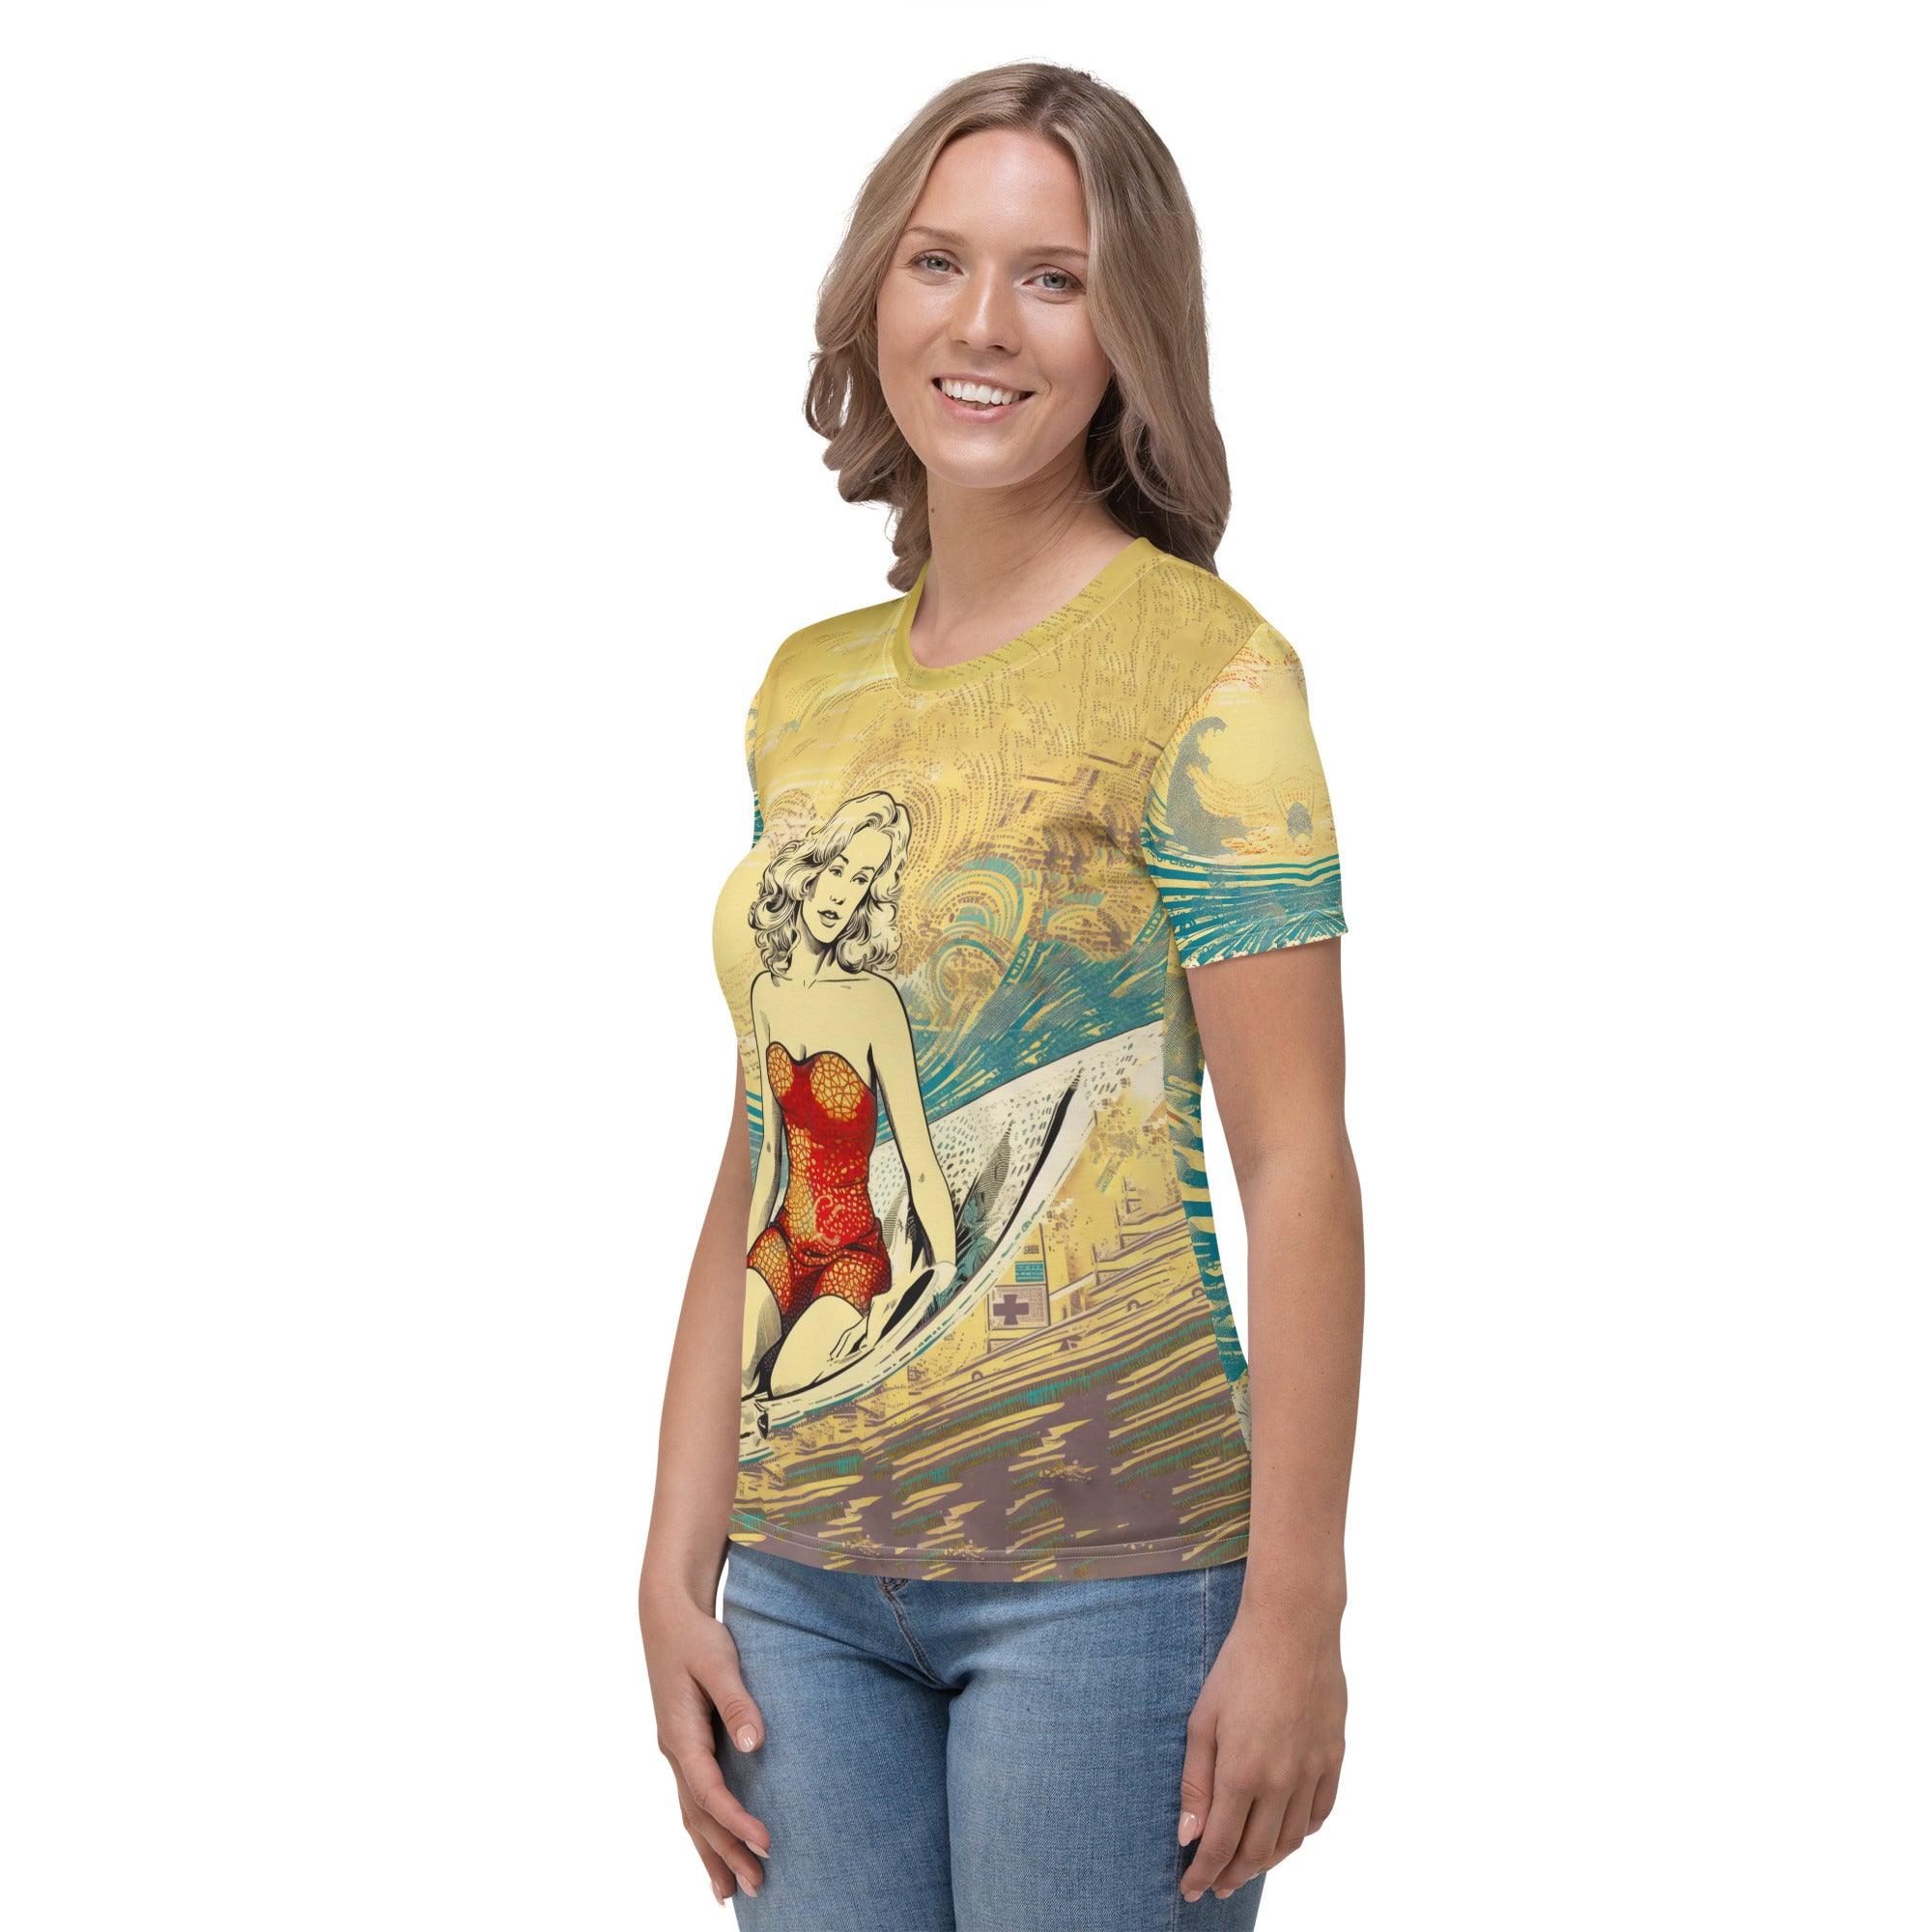 Wave Chaser All-Over Print Women's Crew Neck T-Shirt - Beyond T-shirts